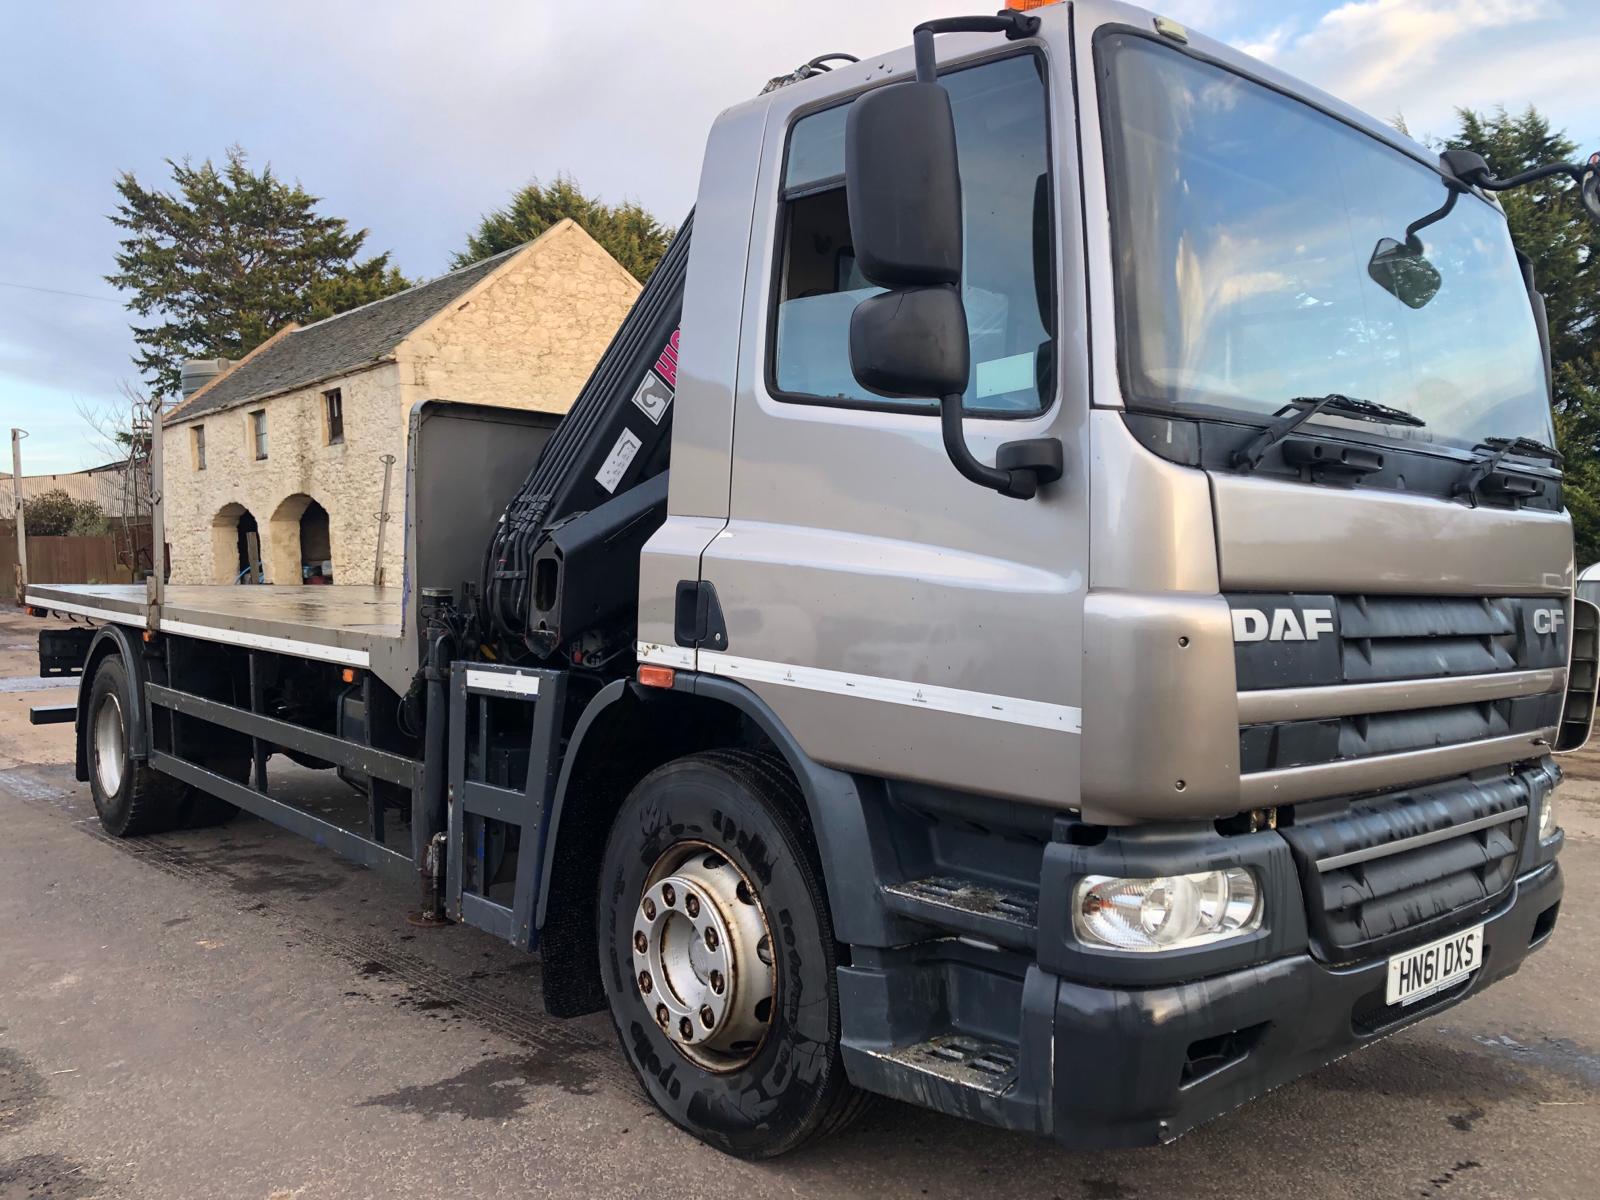 DAF CF65 18 Ton Lorry  for sale